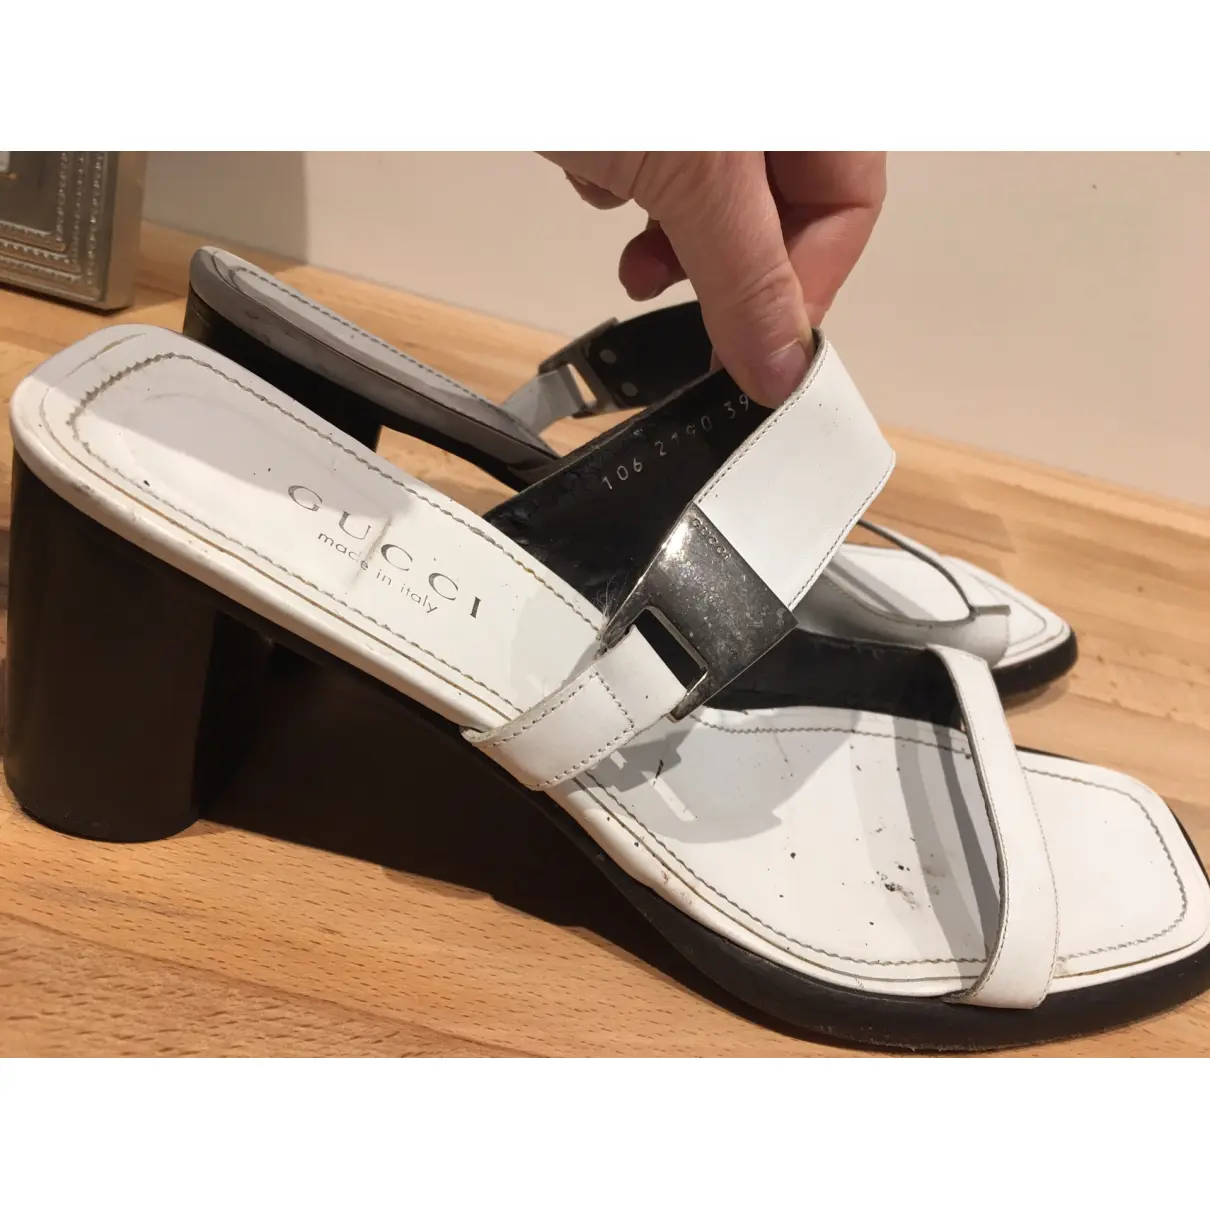 Buy Gucci Leather sandal online